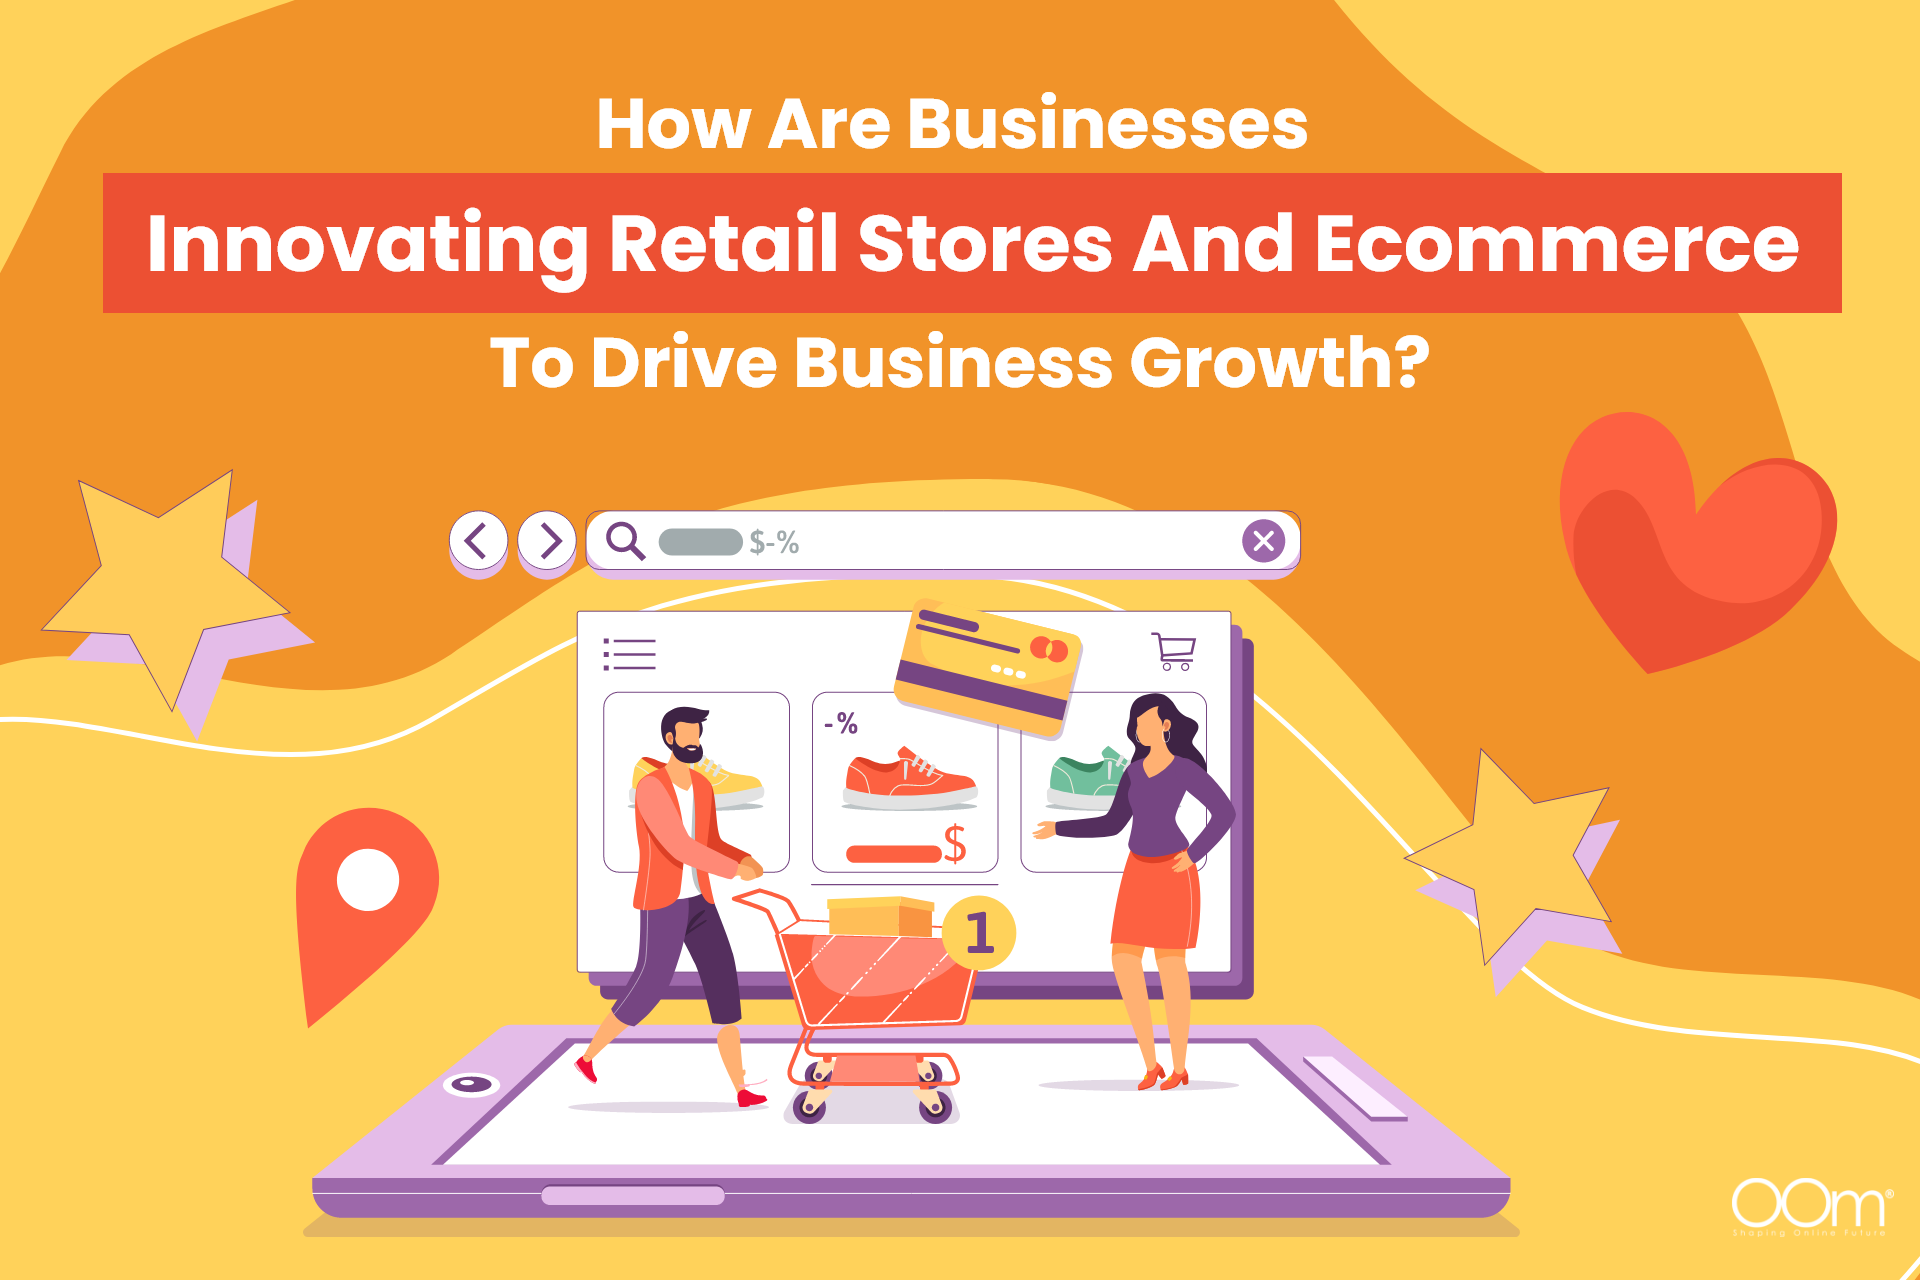 How Are Businesses Innovating Retail Stores And Ecommerce To Drive Business Growth??